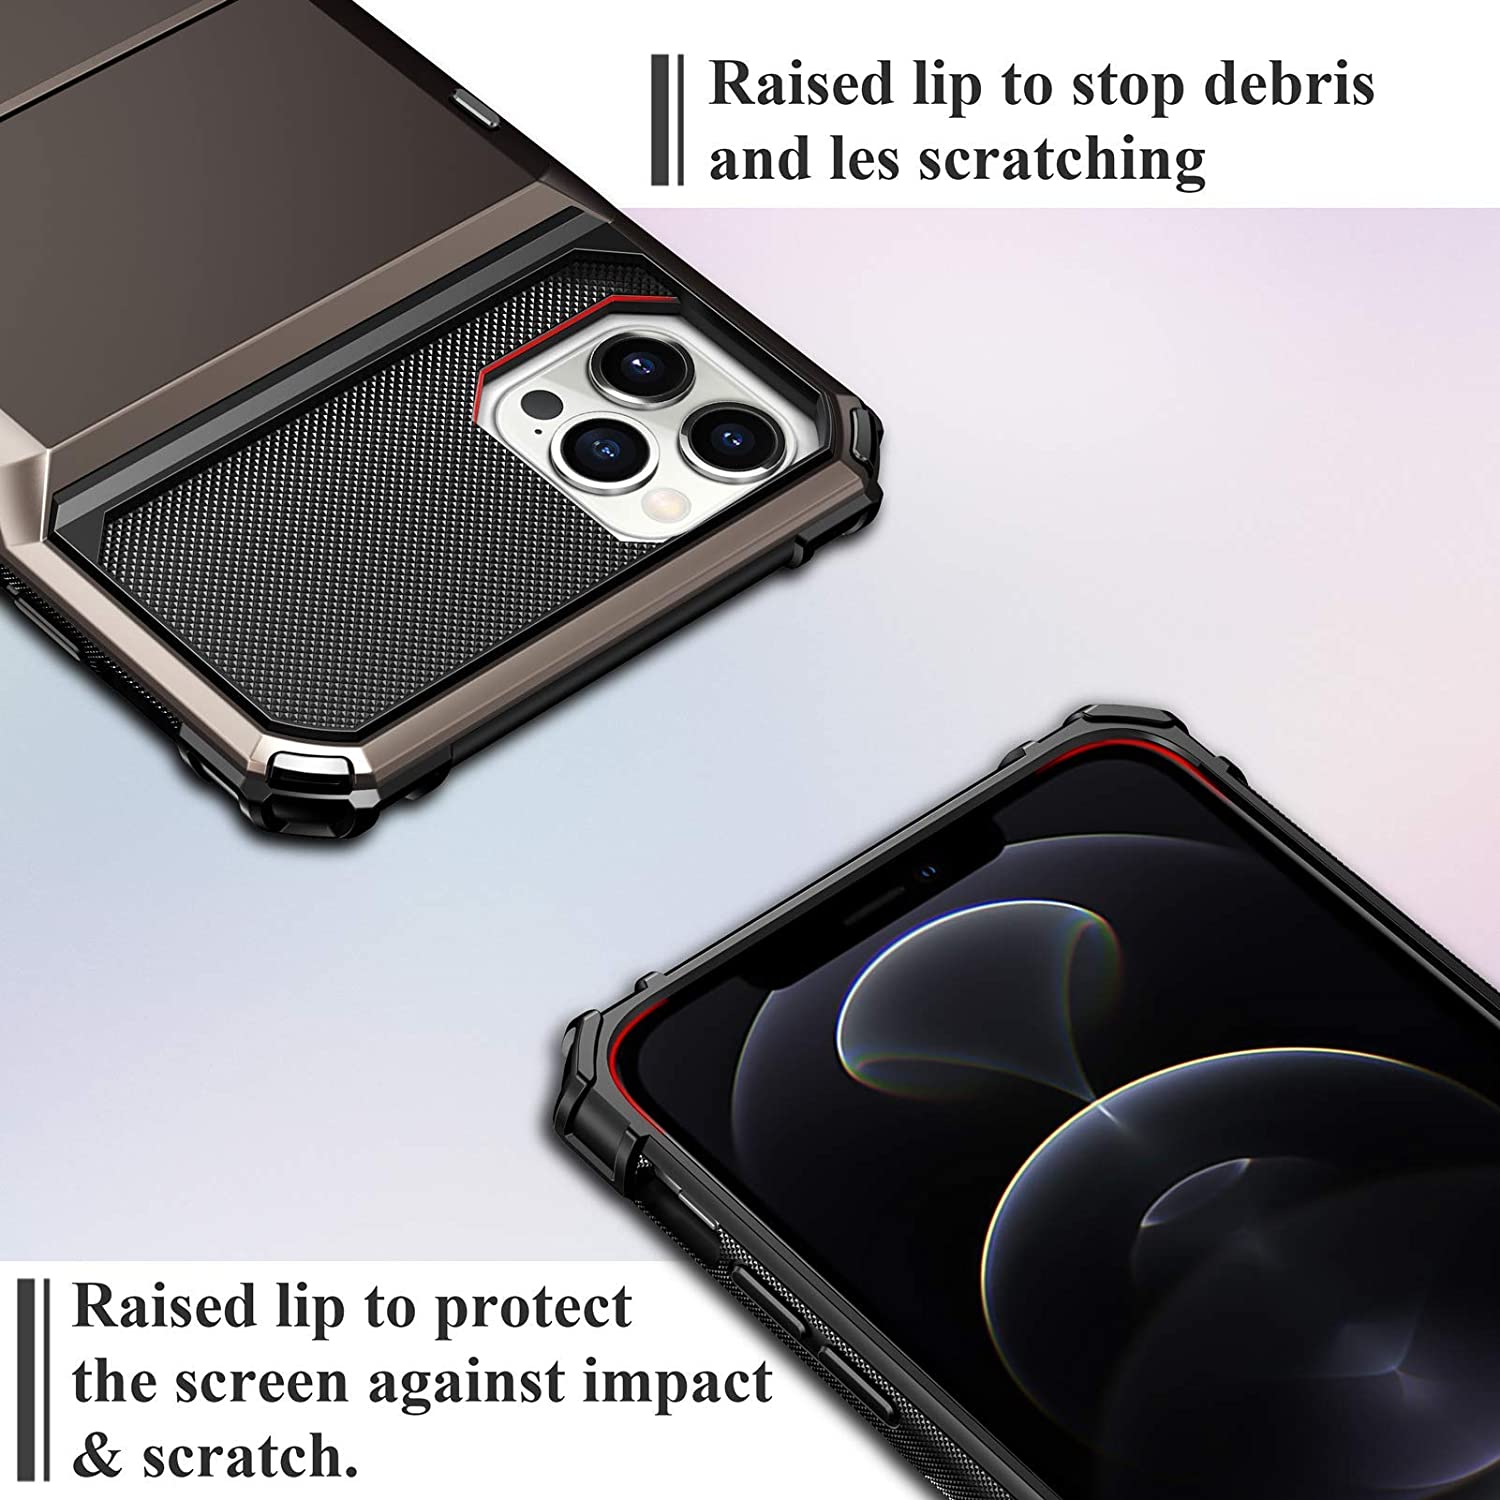 iphone 8 case with card holder protects camera